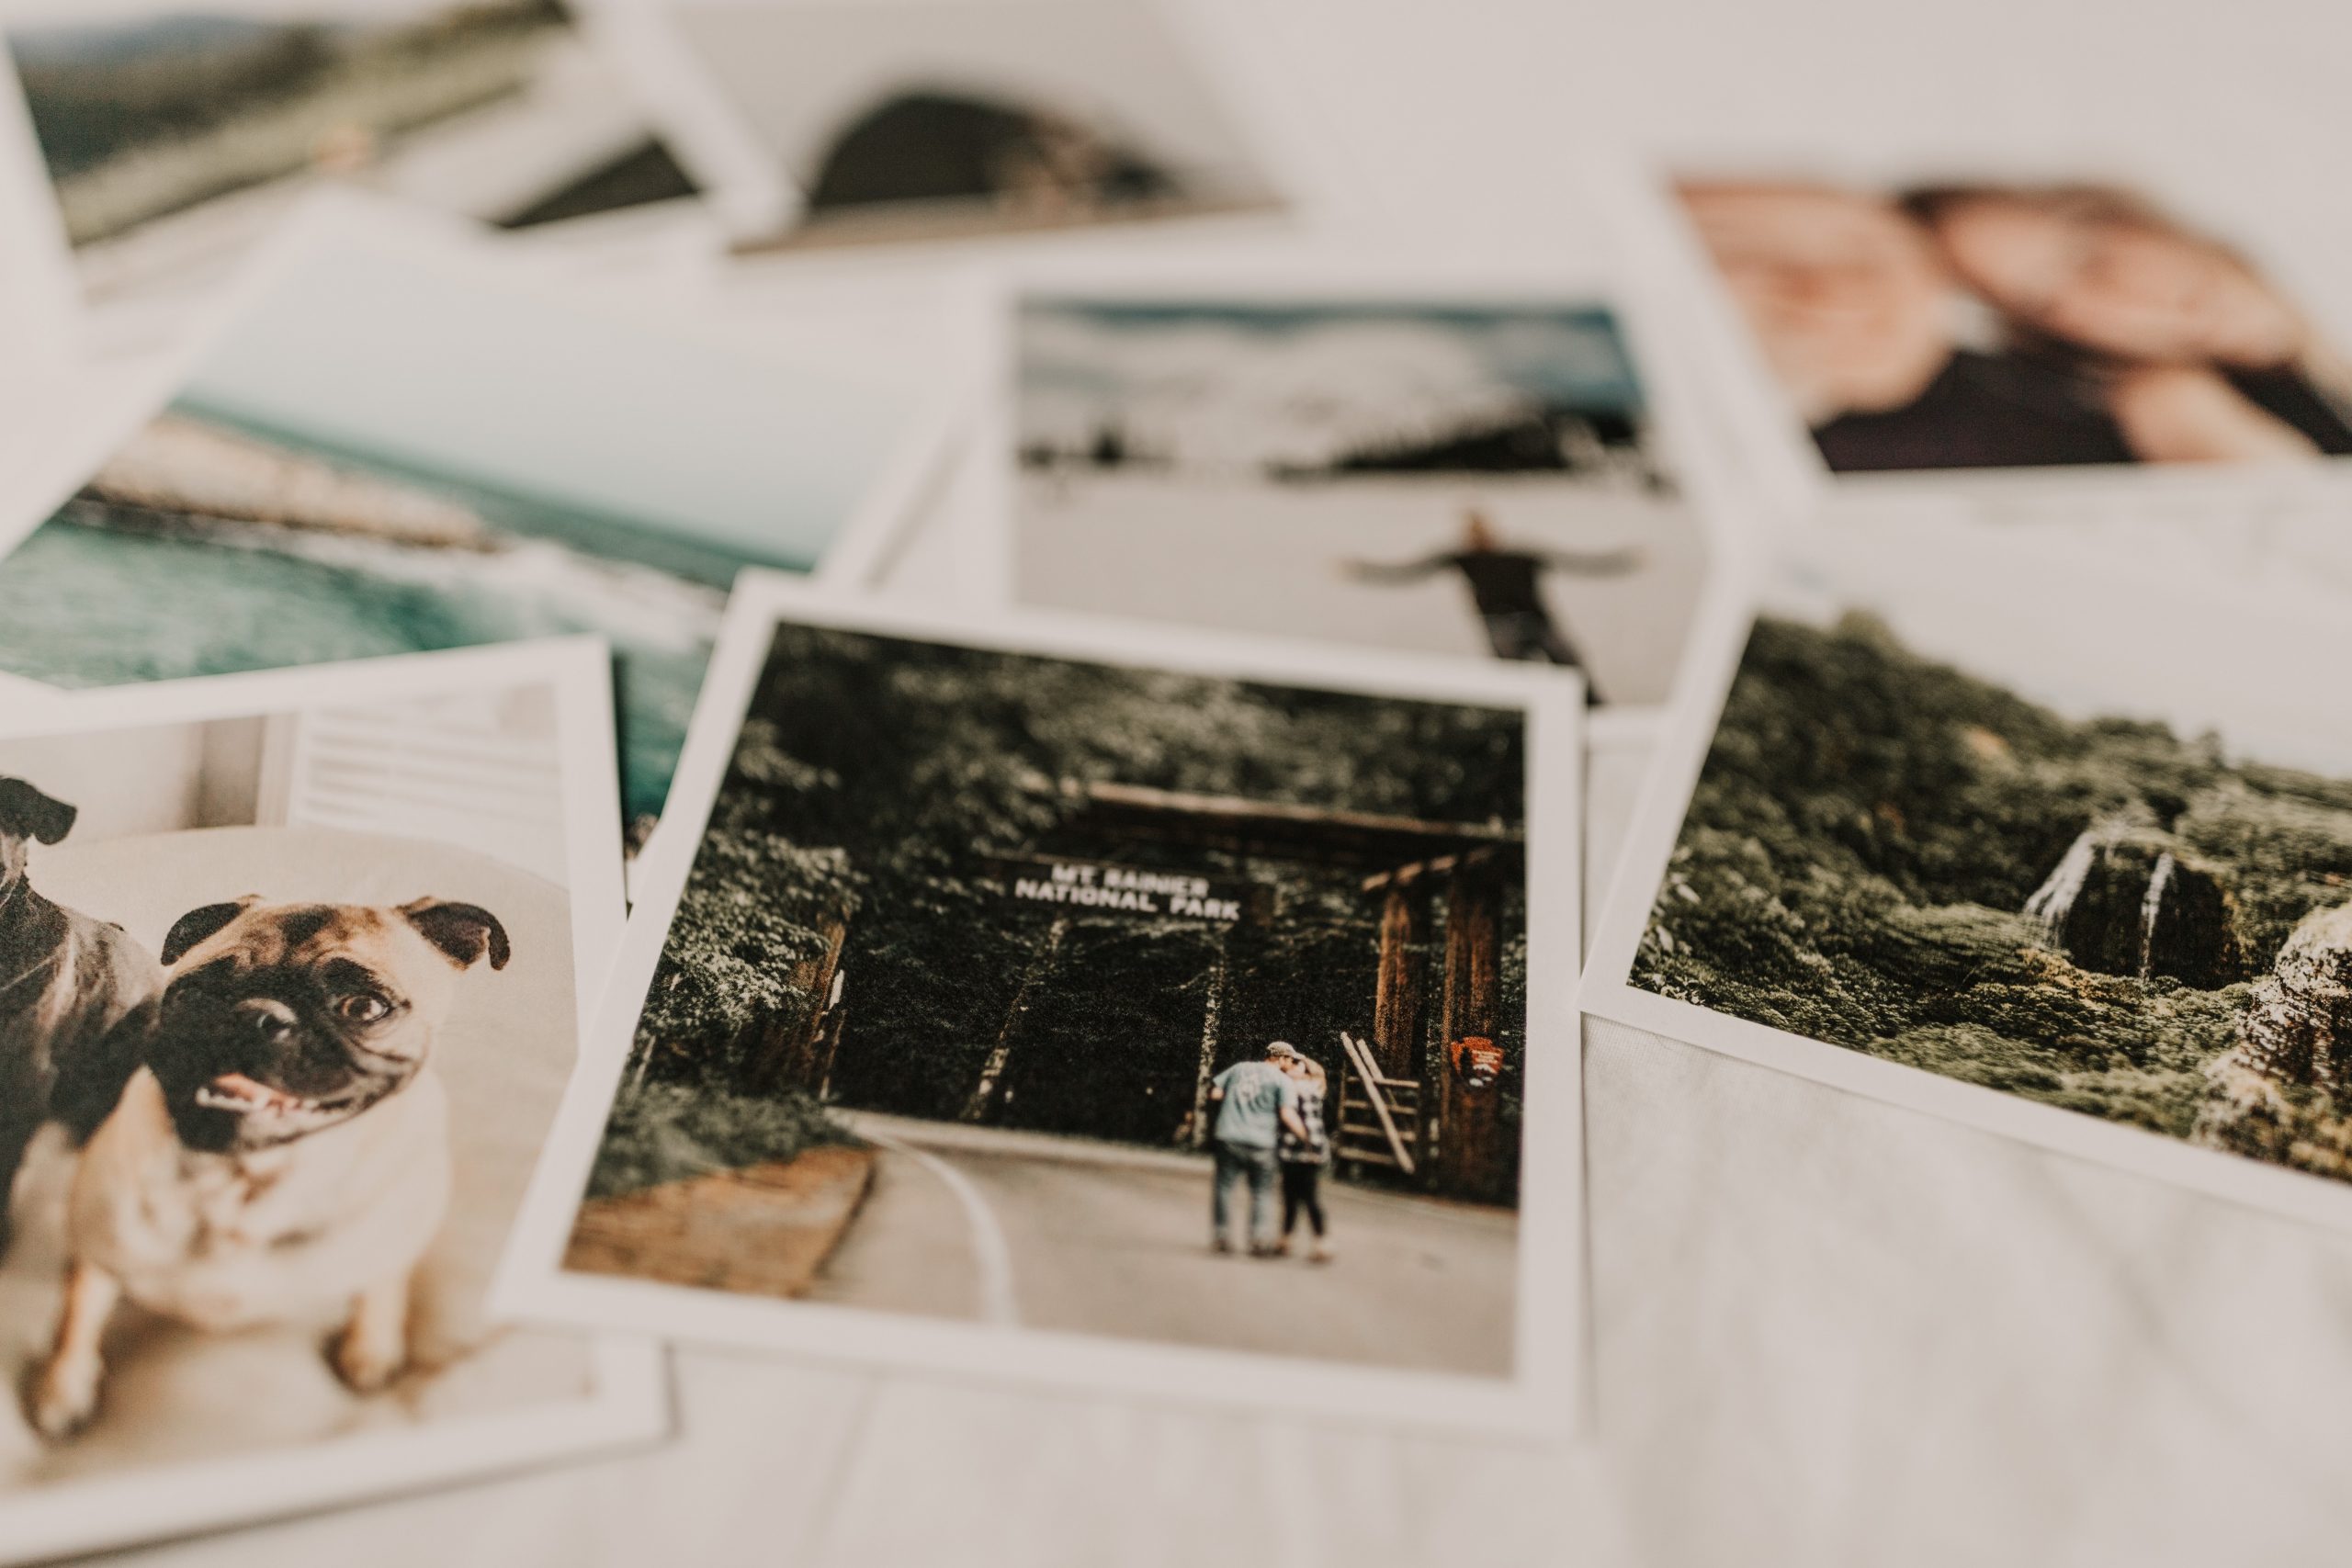 Photograph of some polaroids on a table